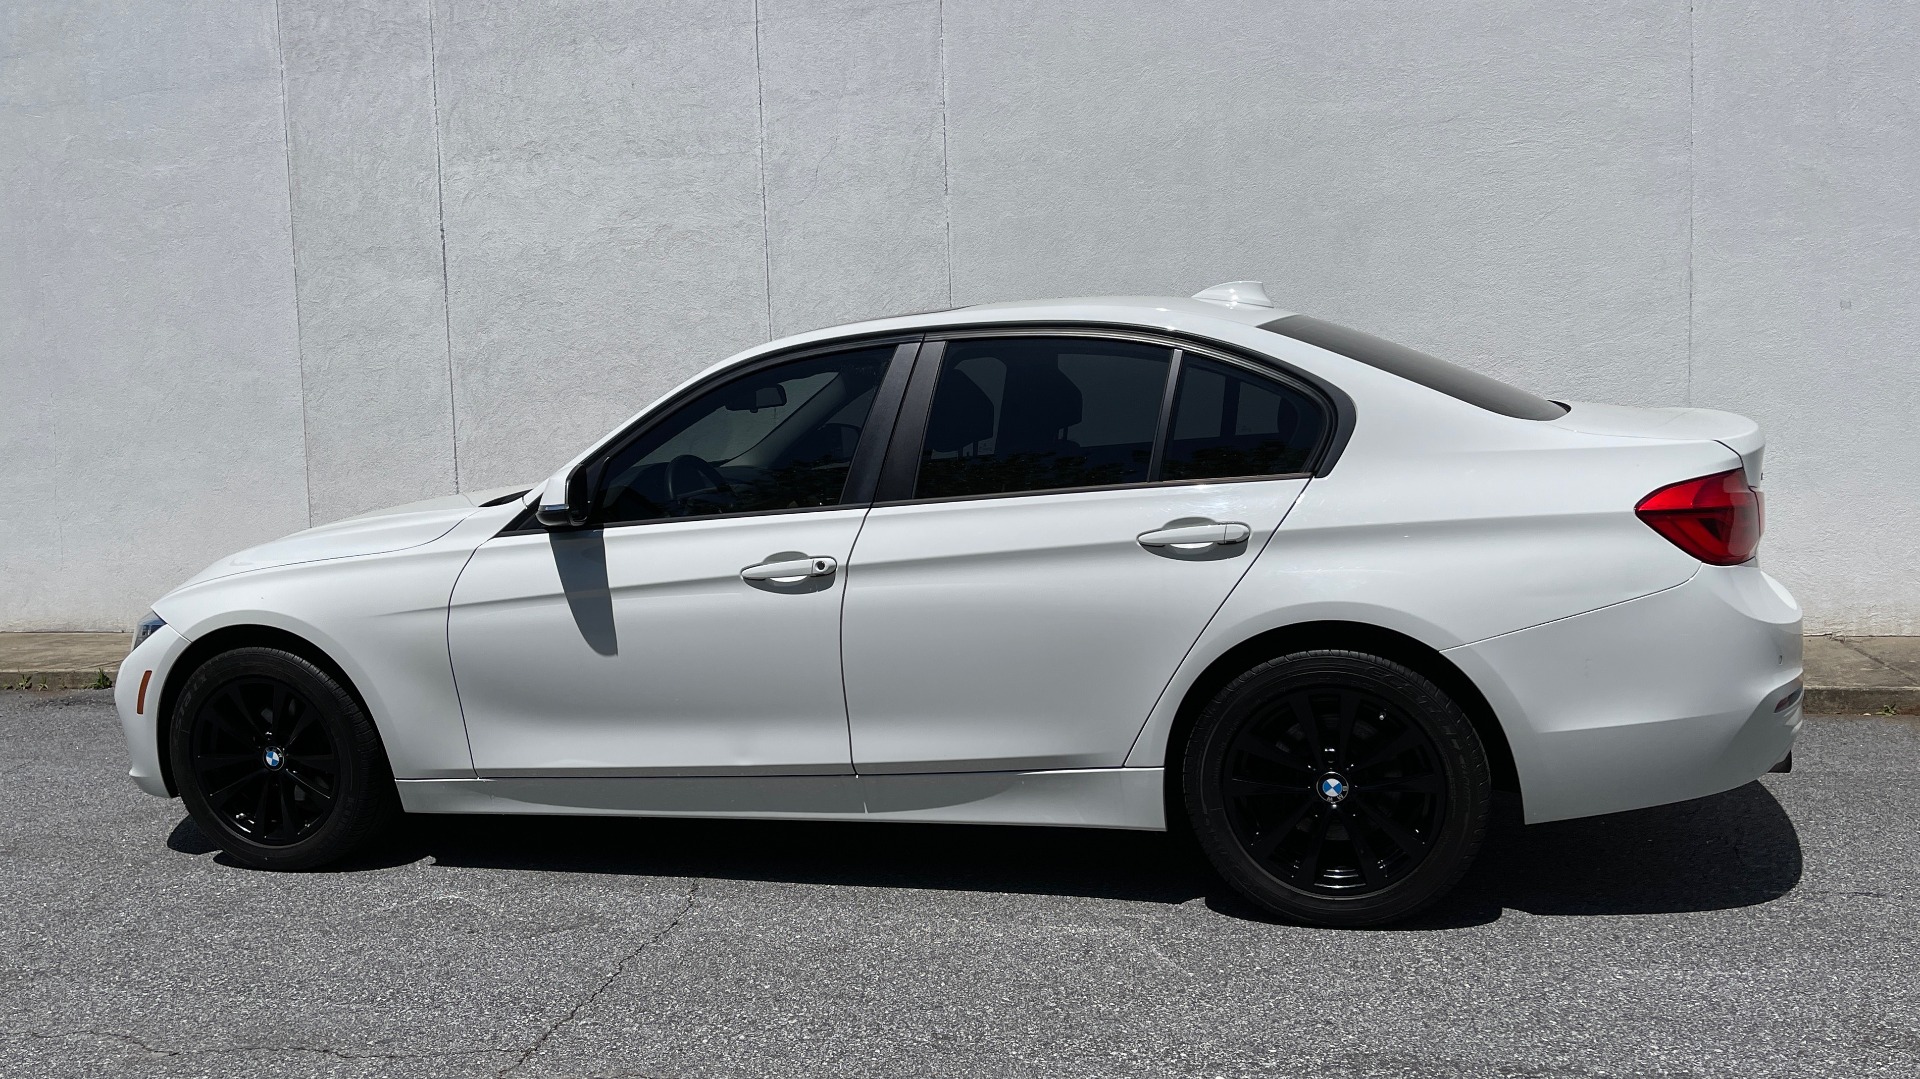 Used 2017 BMW 3 SERIES 320I XDRIVE SEDAN / DRVR ASST / SUNROOF / HTD STS / REARVIEW for sale $25,295 at Formula Imports in Charlotte NC 28227 4